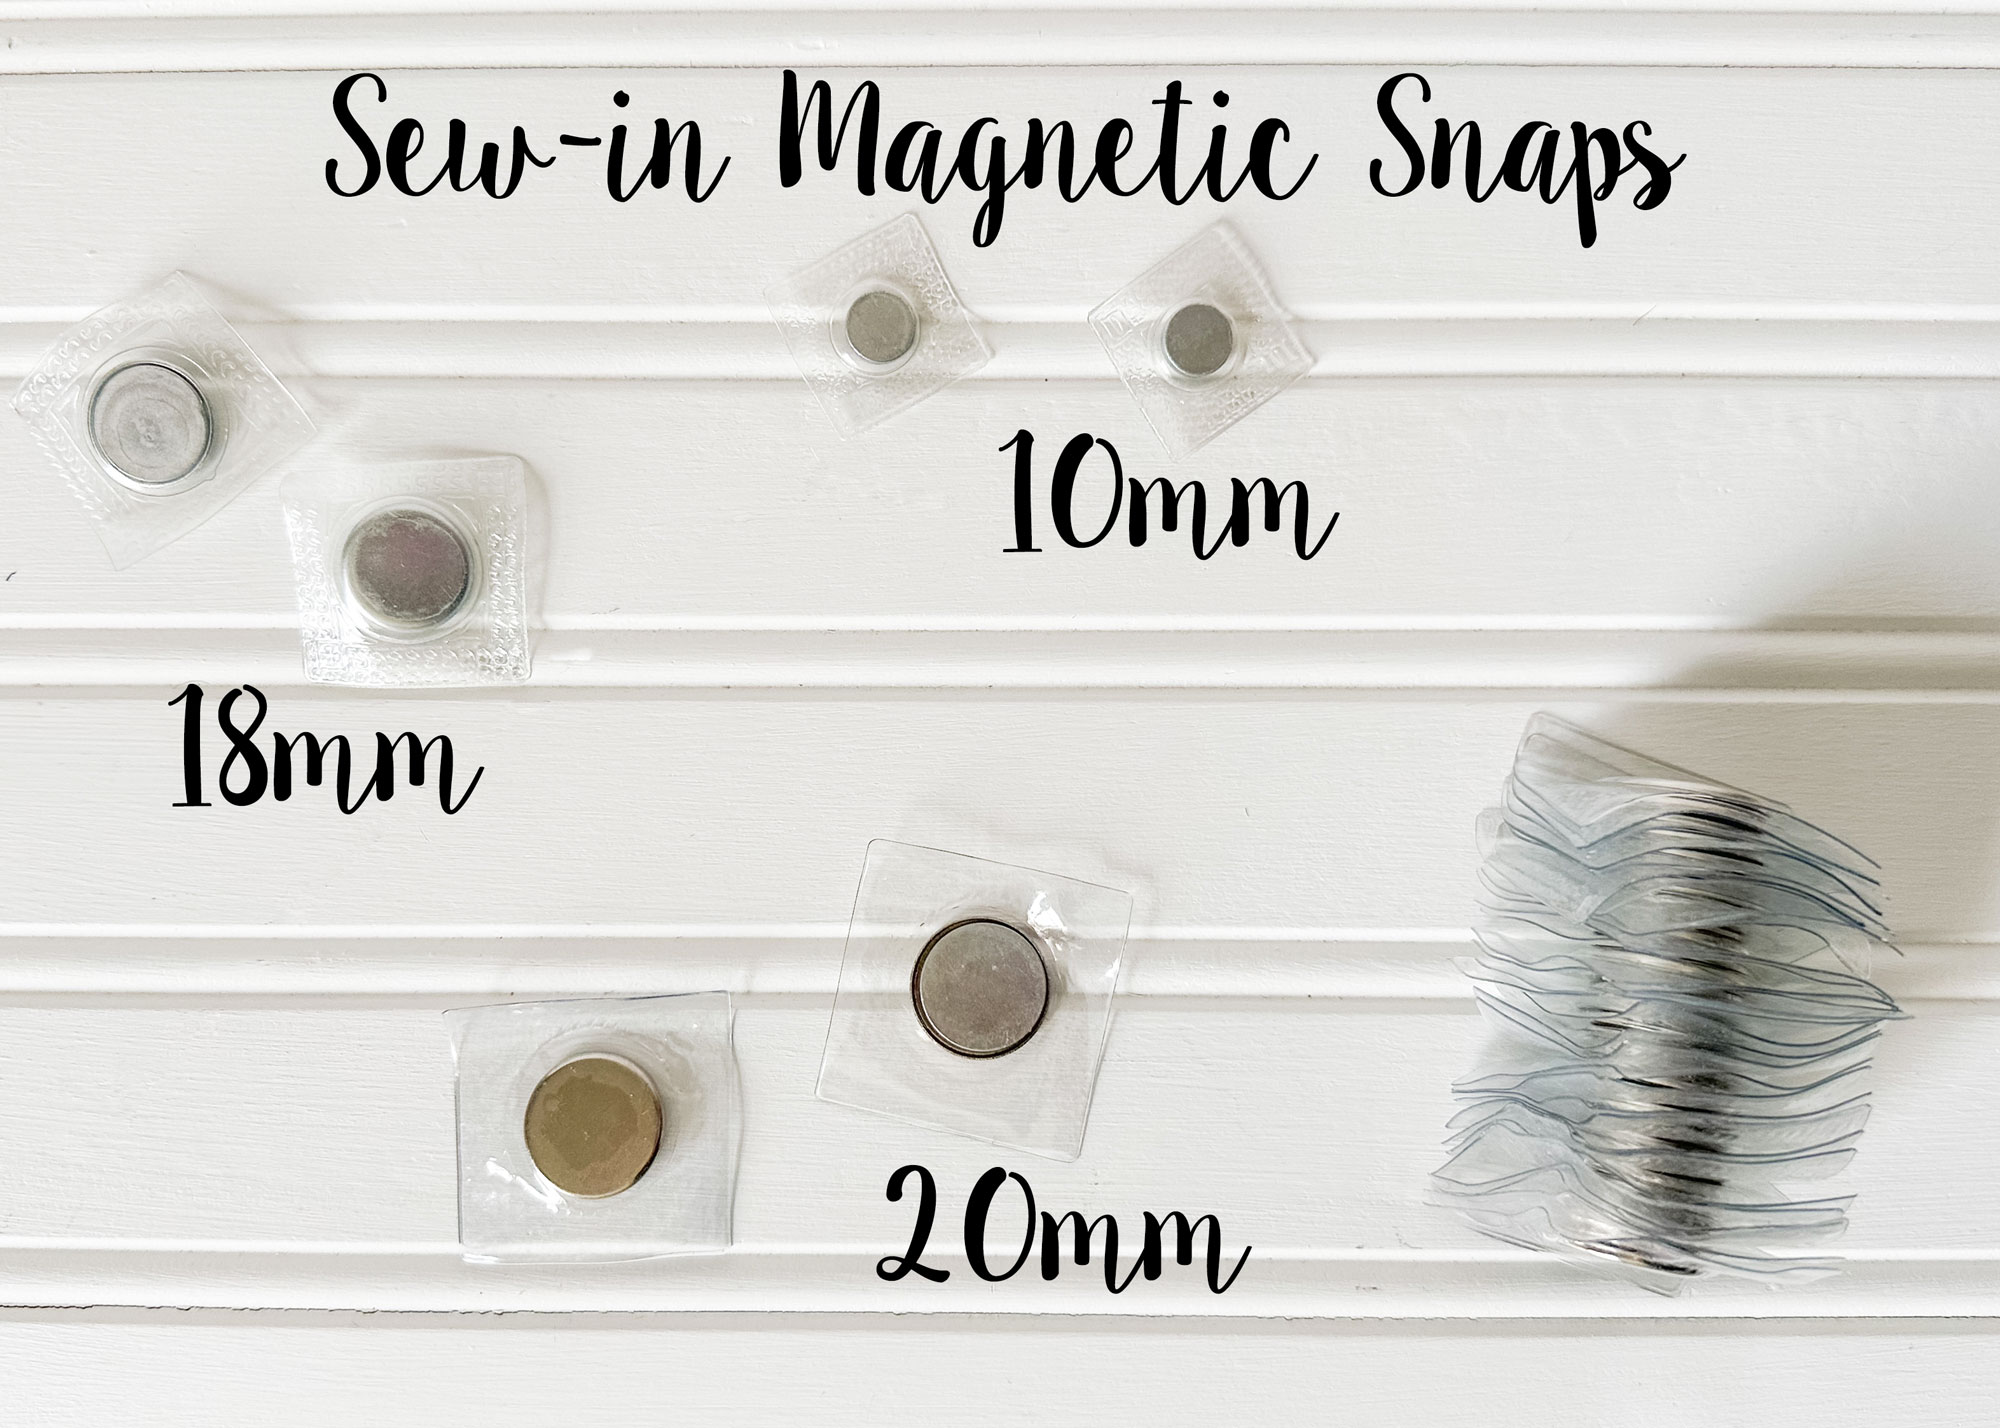 How to Use Magnetic Snaps in a Purse or Bag